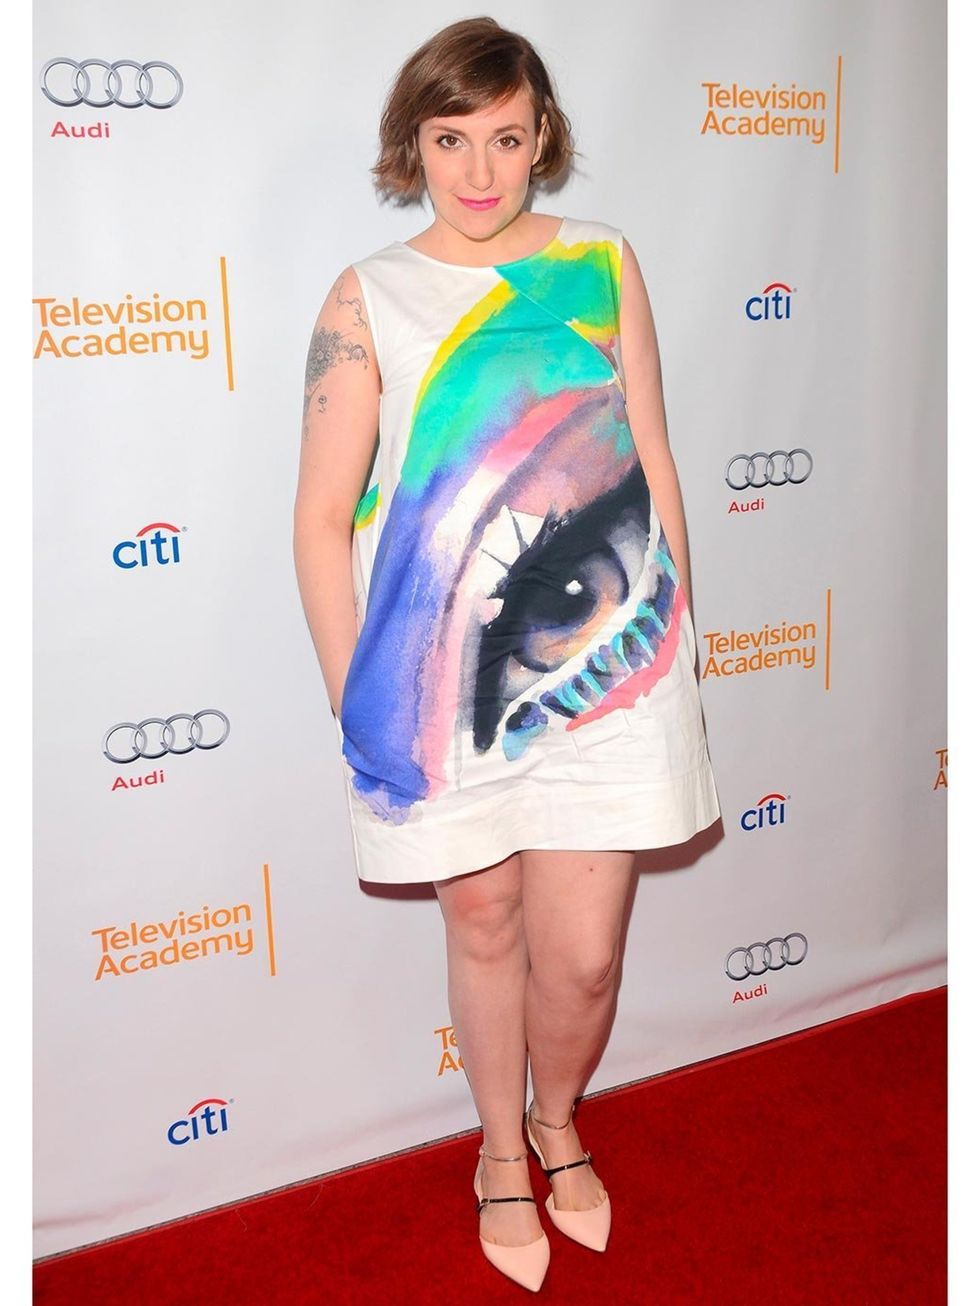 <p>Lena Dunham at The Television Academy Hosts An Evening With Girls event, LA, 2014.</p>